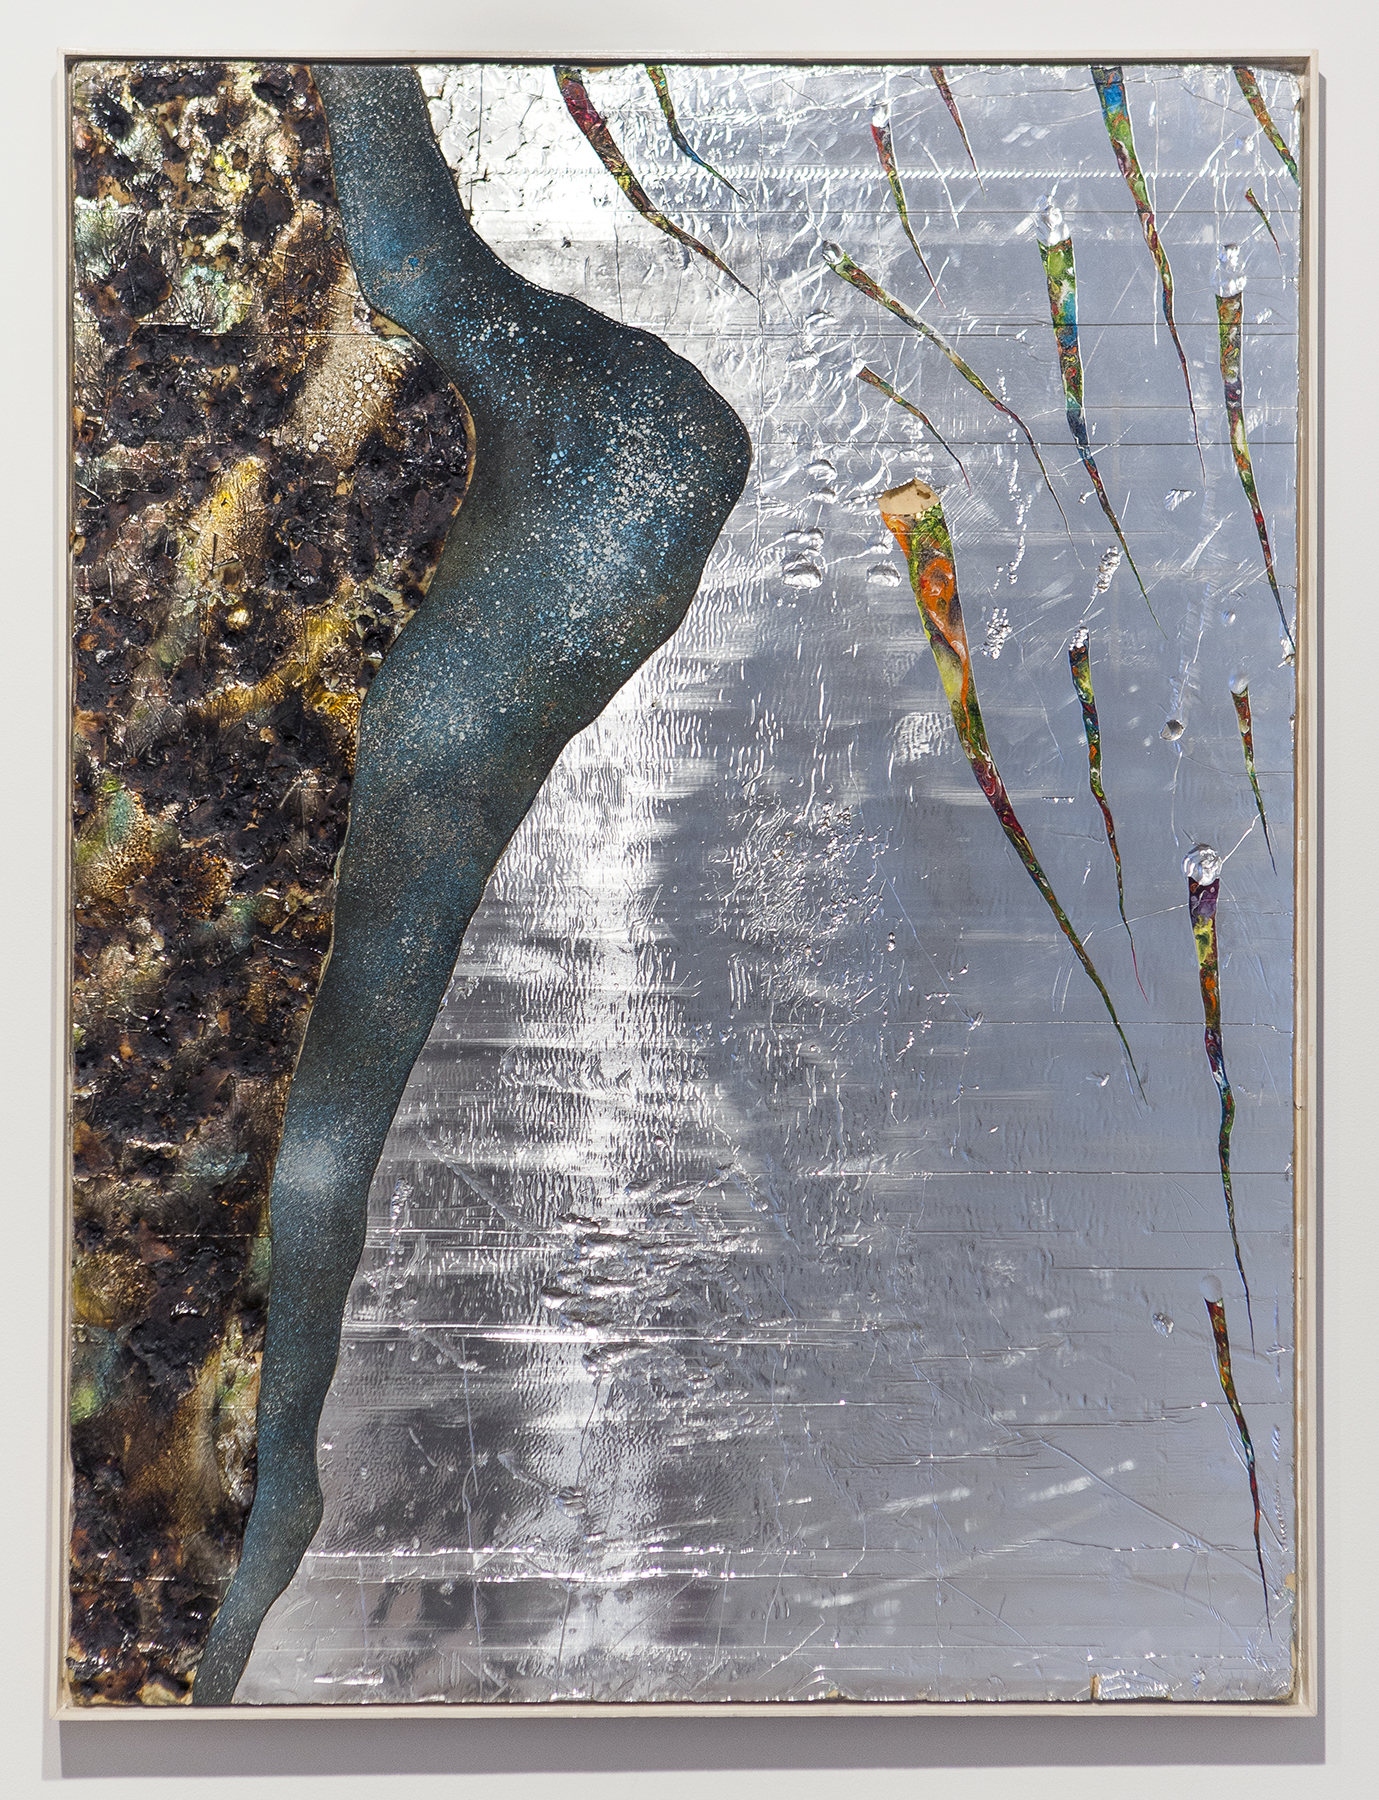 Davide_Zucco-11_Are_you_shivering_Are_you_cold_Are_you_bathed_in_silver_or_drowned_in_gold_2014_oil_paint_acrylic_spray_paint_burns_wood_steel_on_silver_faced_foam_panel